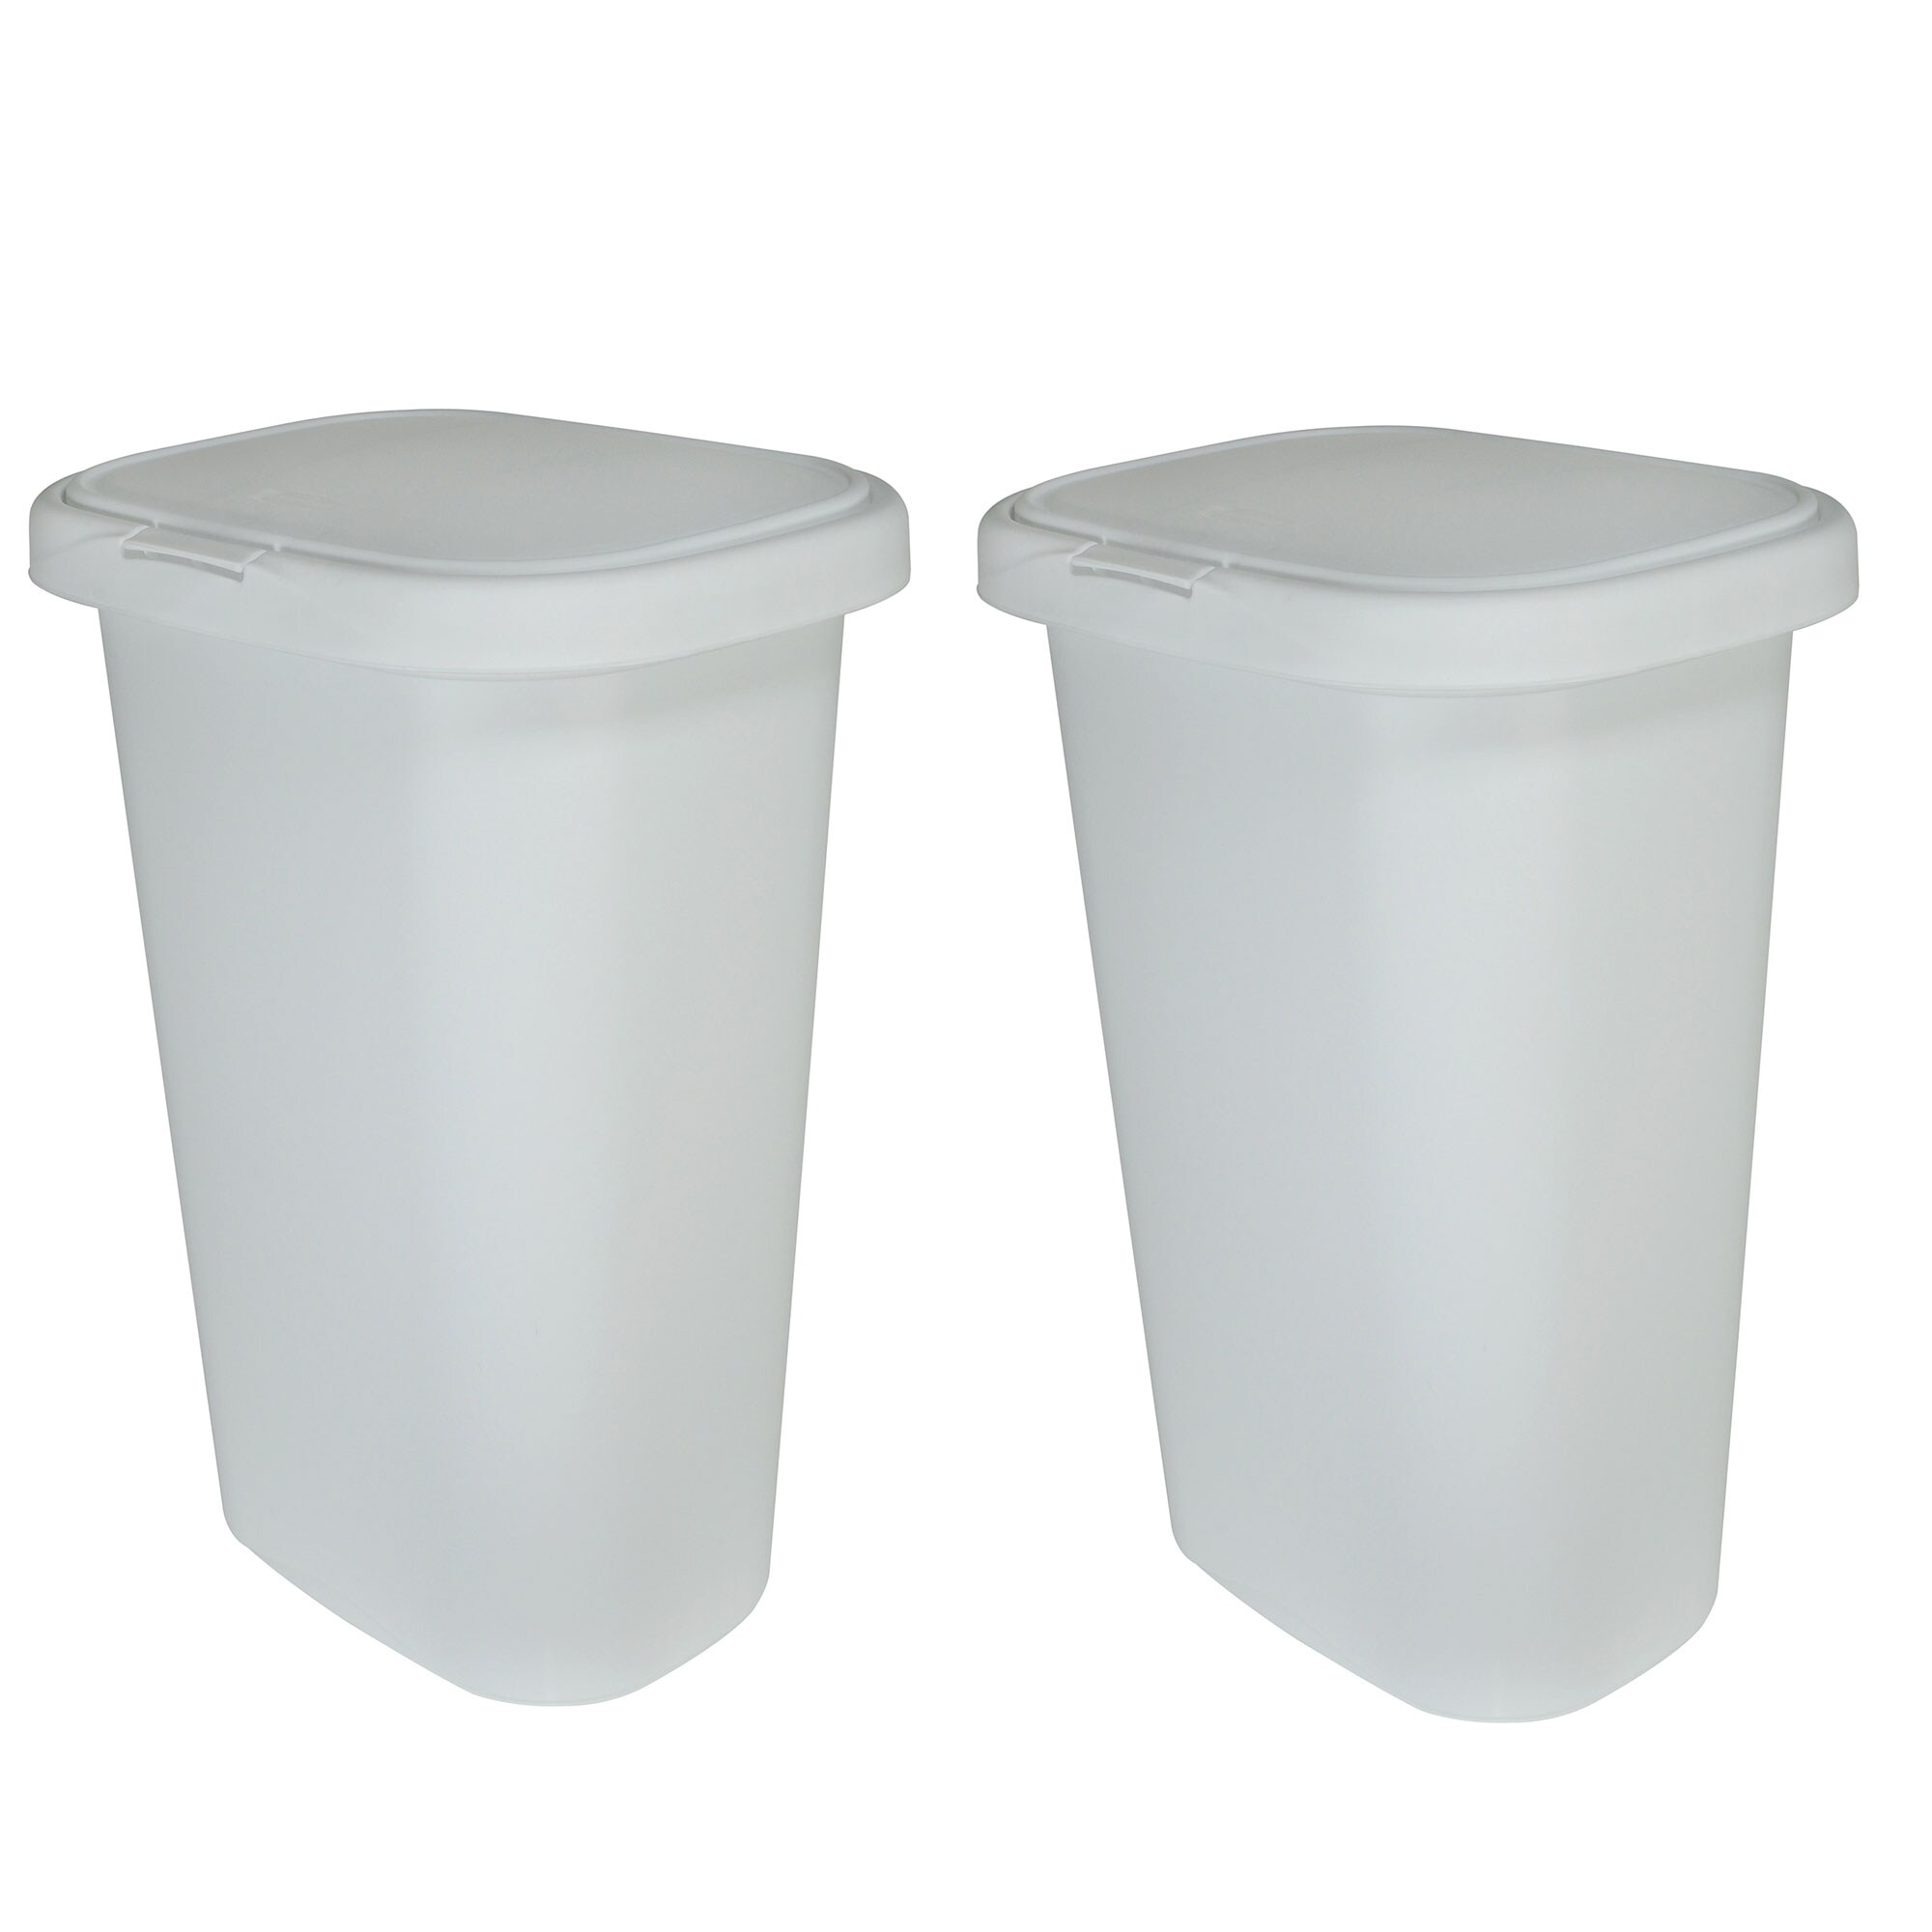 Rectangular Rubbermaid Commercial Sanitary Step Trash Can 3-Gallon White 